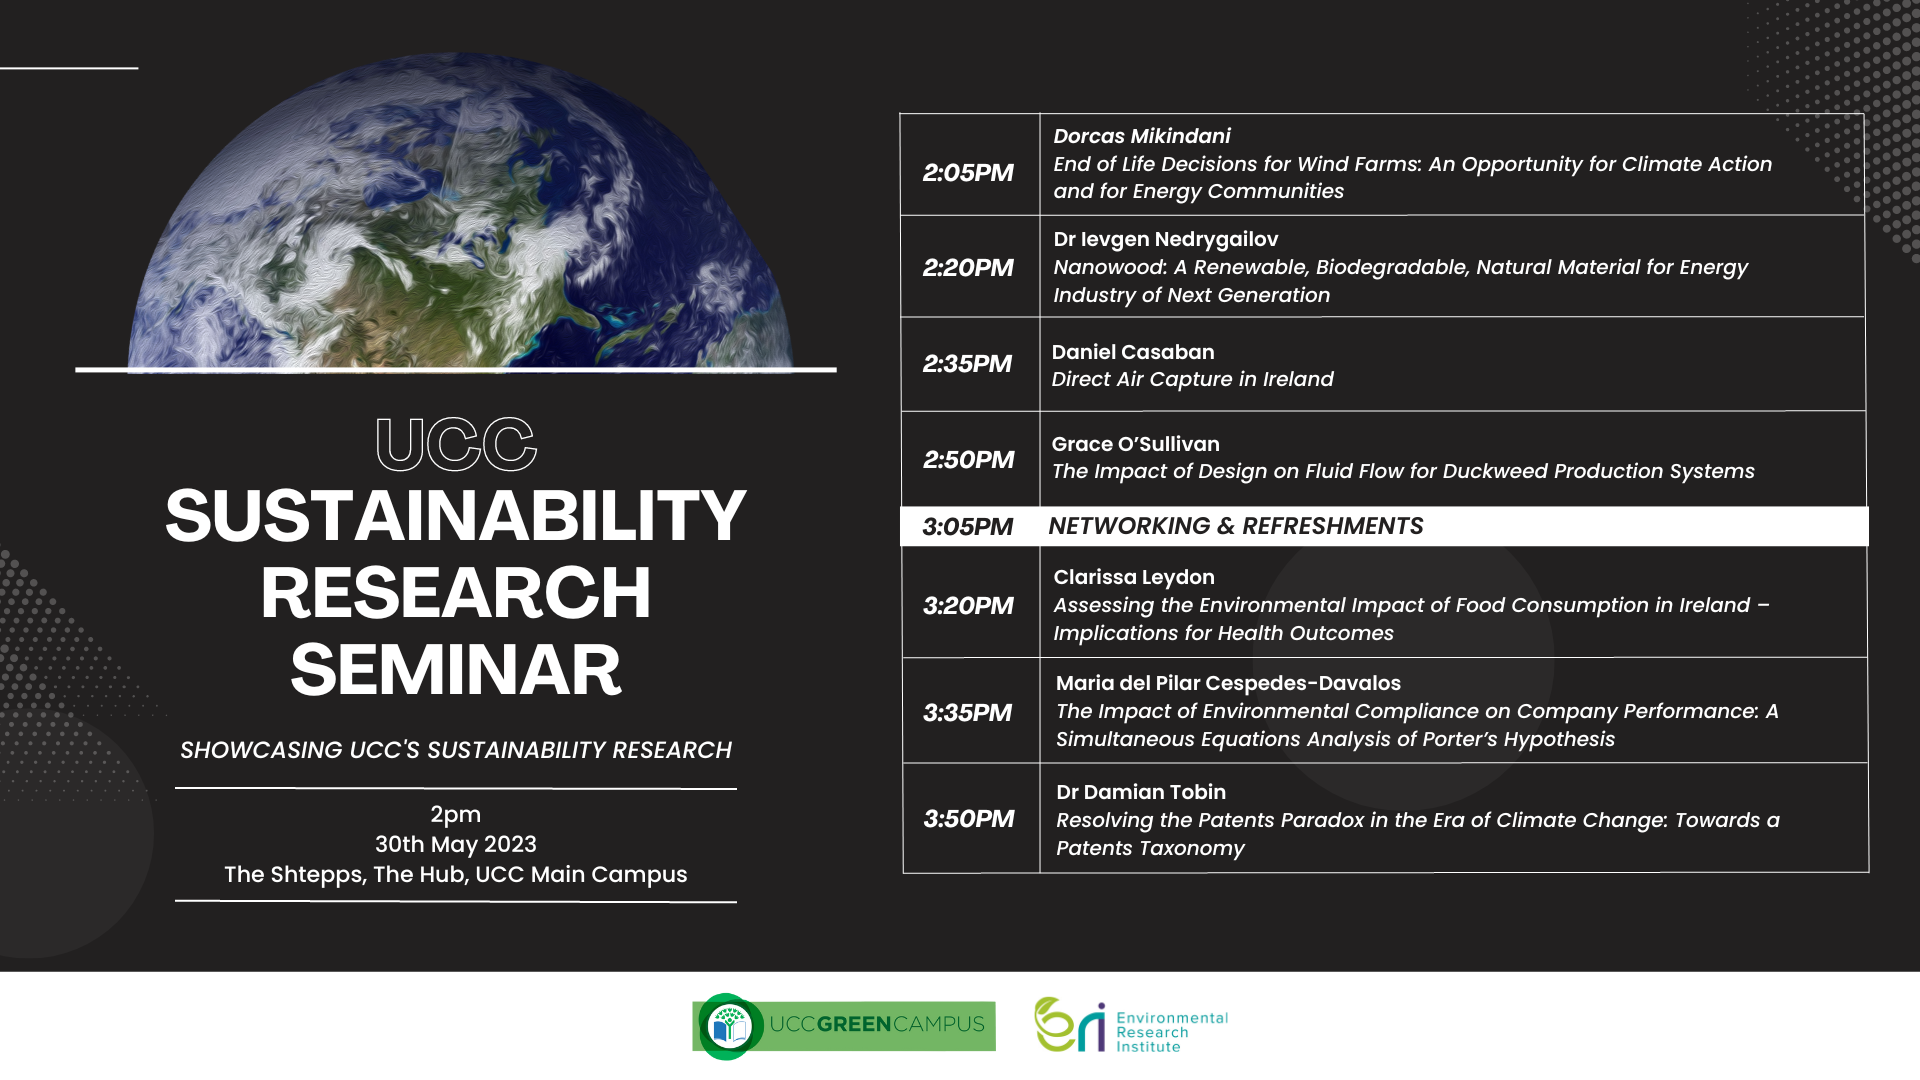 UCC Sustainability Research Seminar 